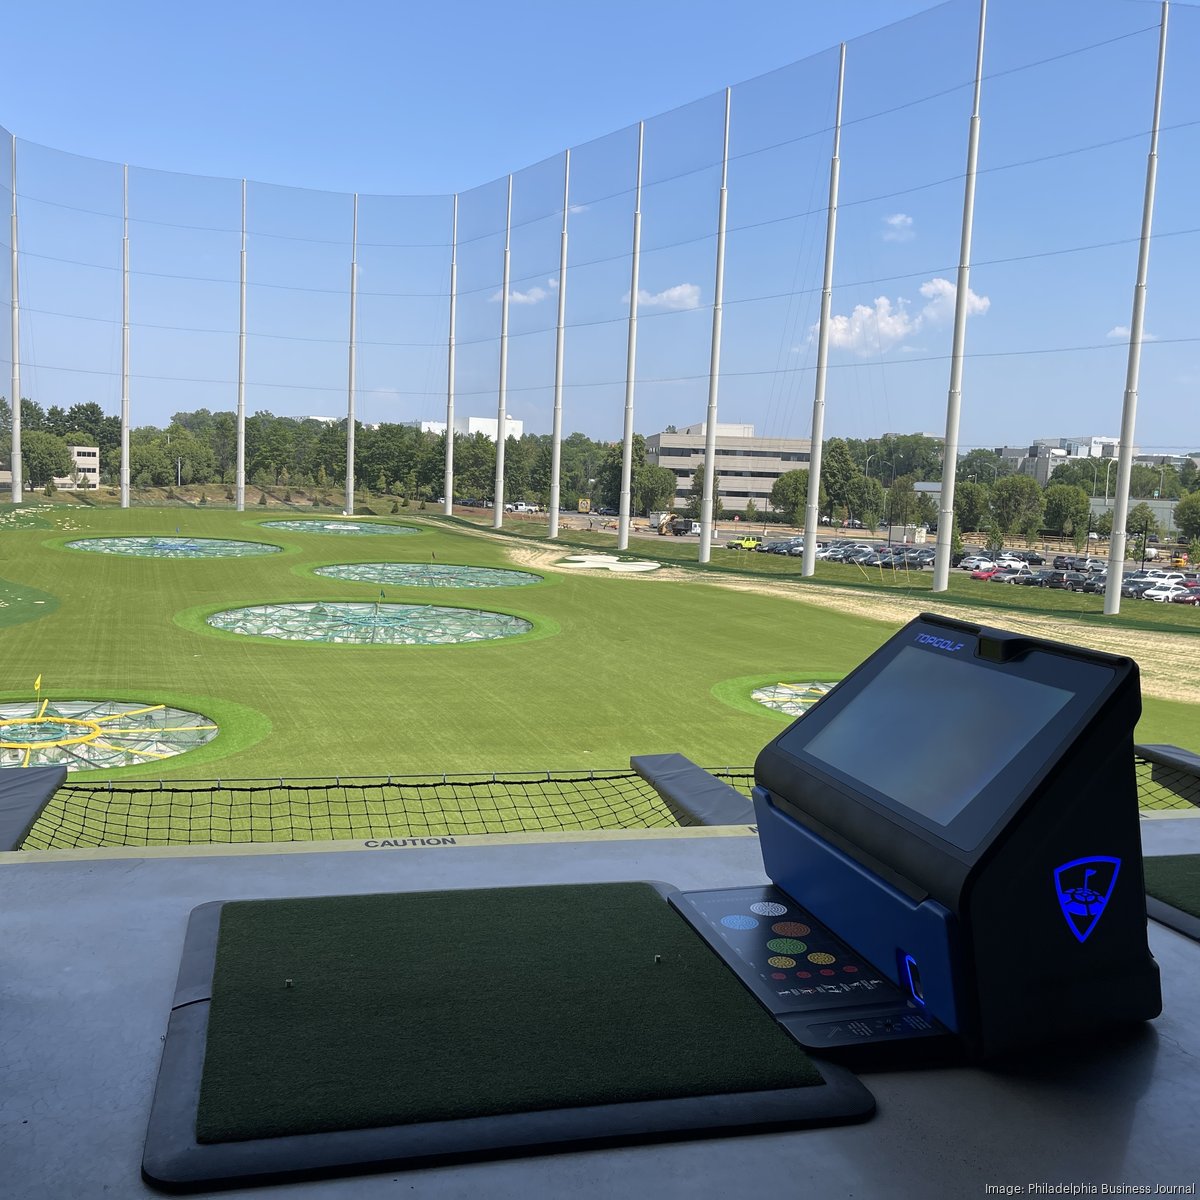 Our Full Experience At The All New Top Golf Orlando! 